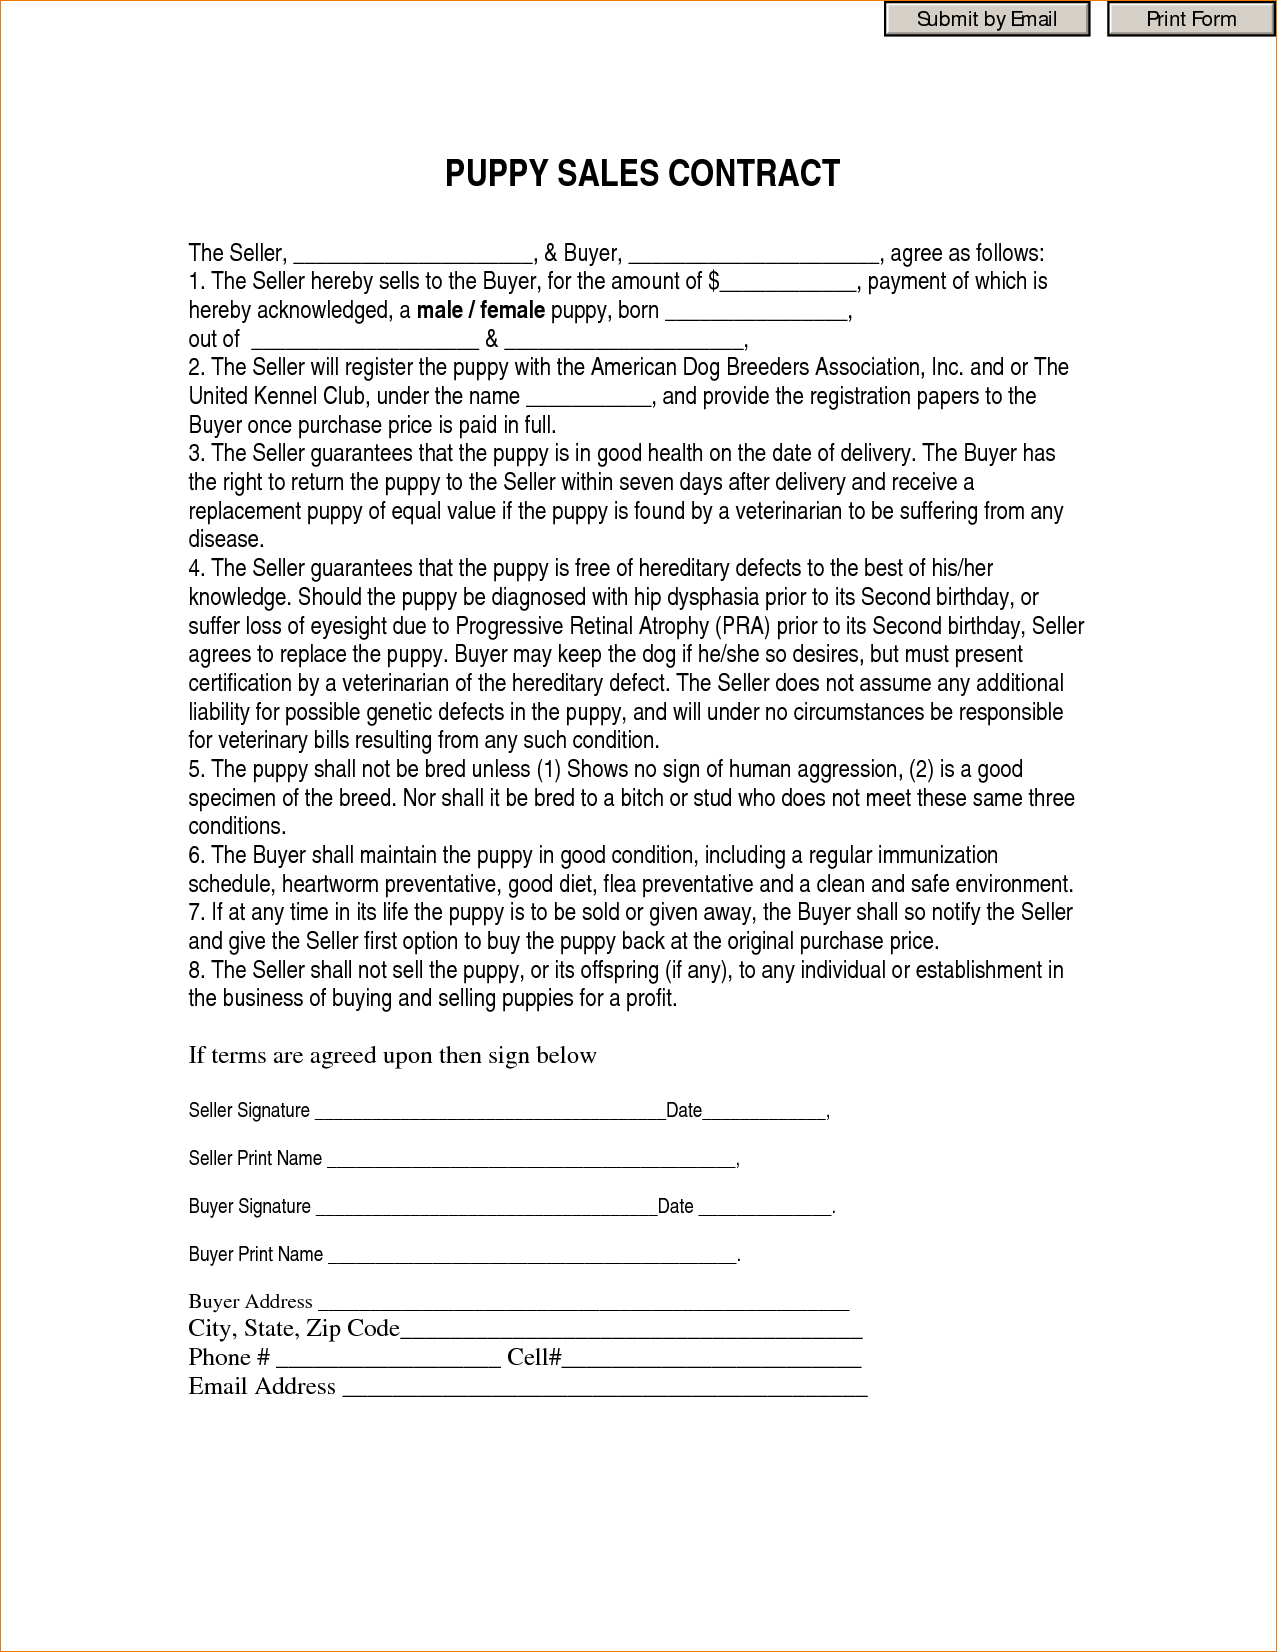 Free Printable Puppy Sales Contract | Free Printable